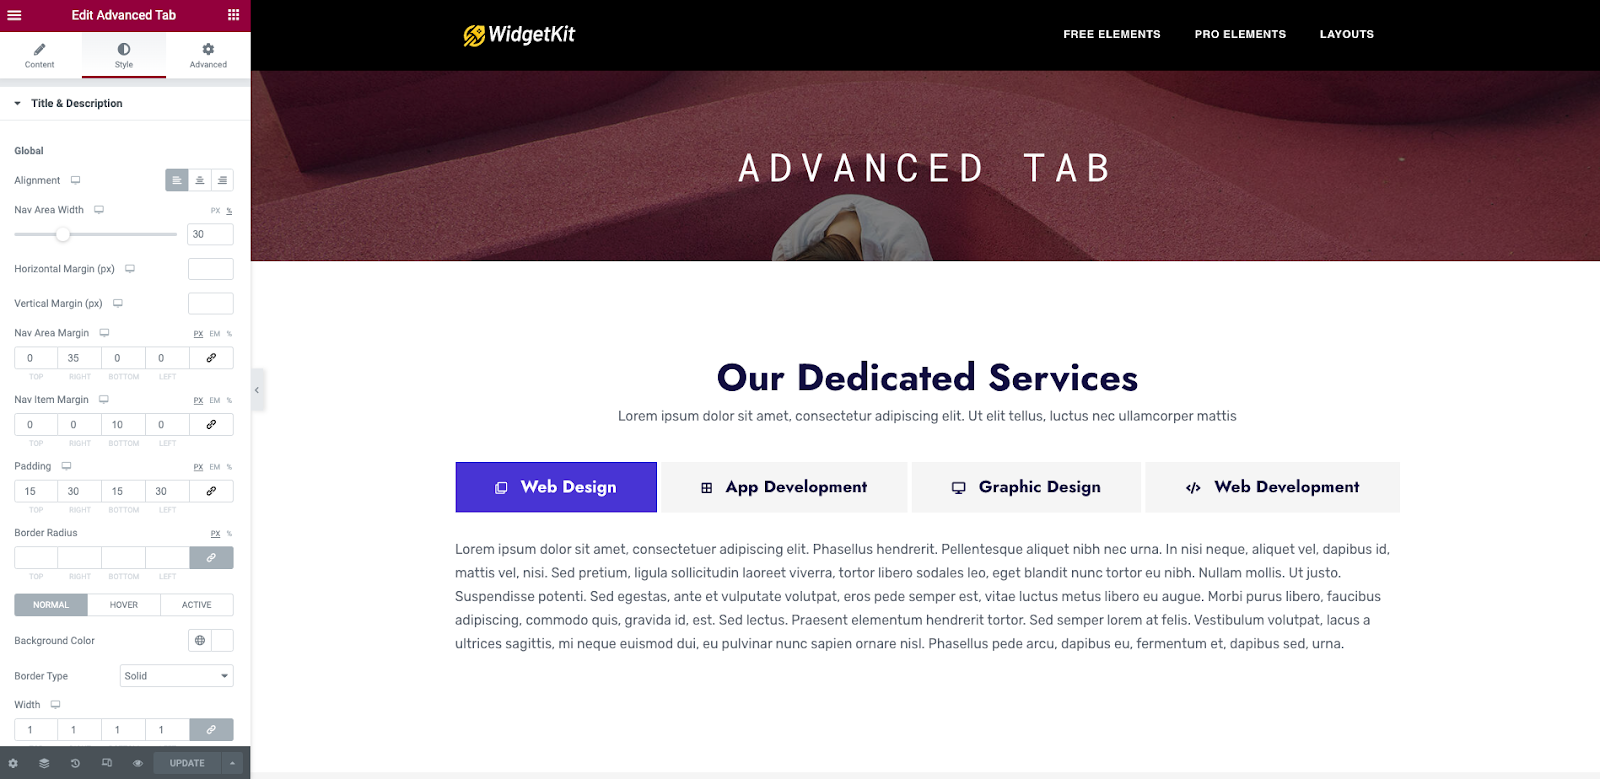 Introducing Advanced Tab for WidgetKit to Present Your Content in an Organized Way 2